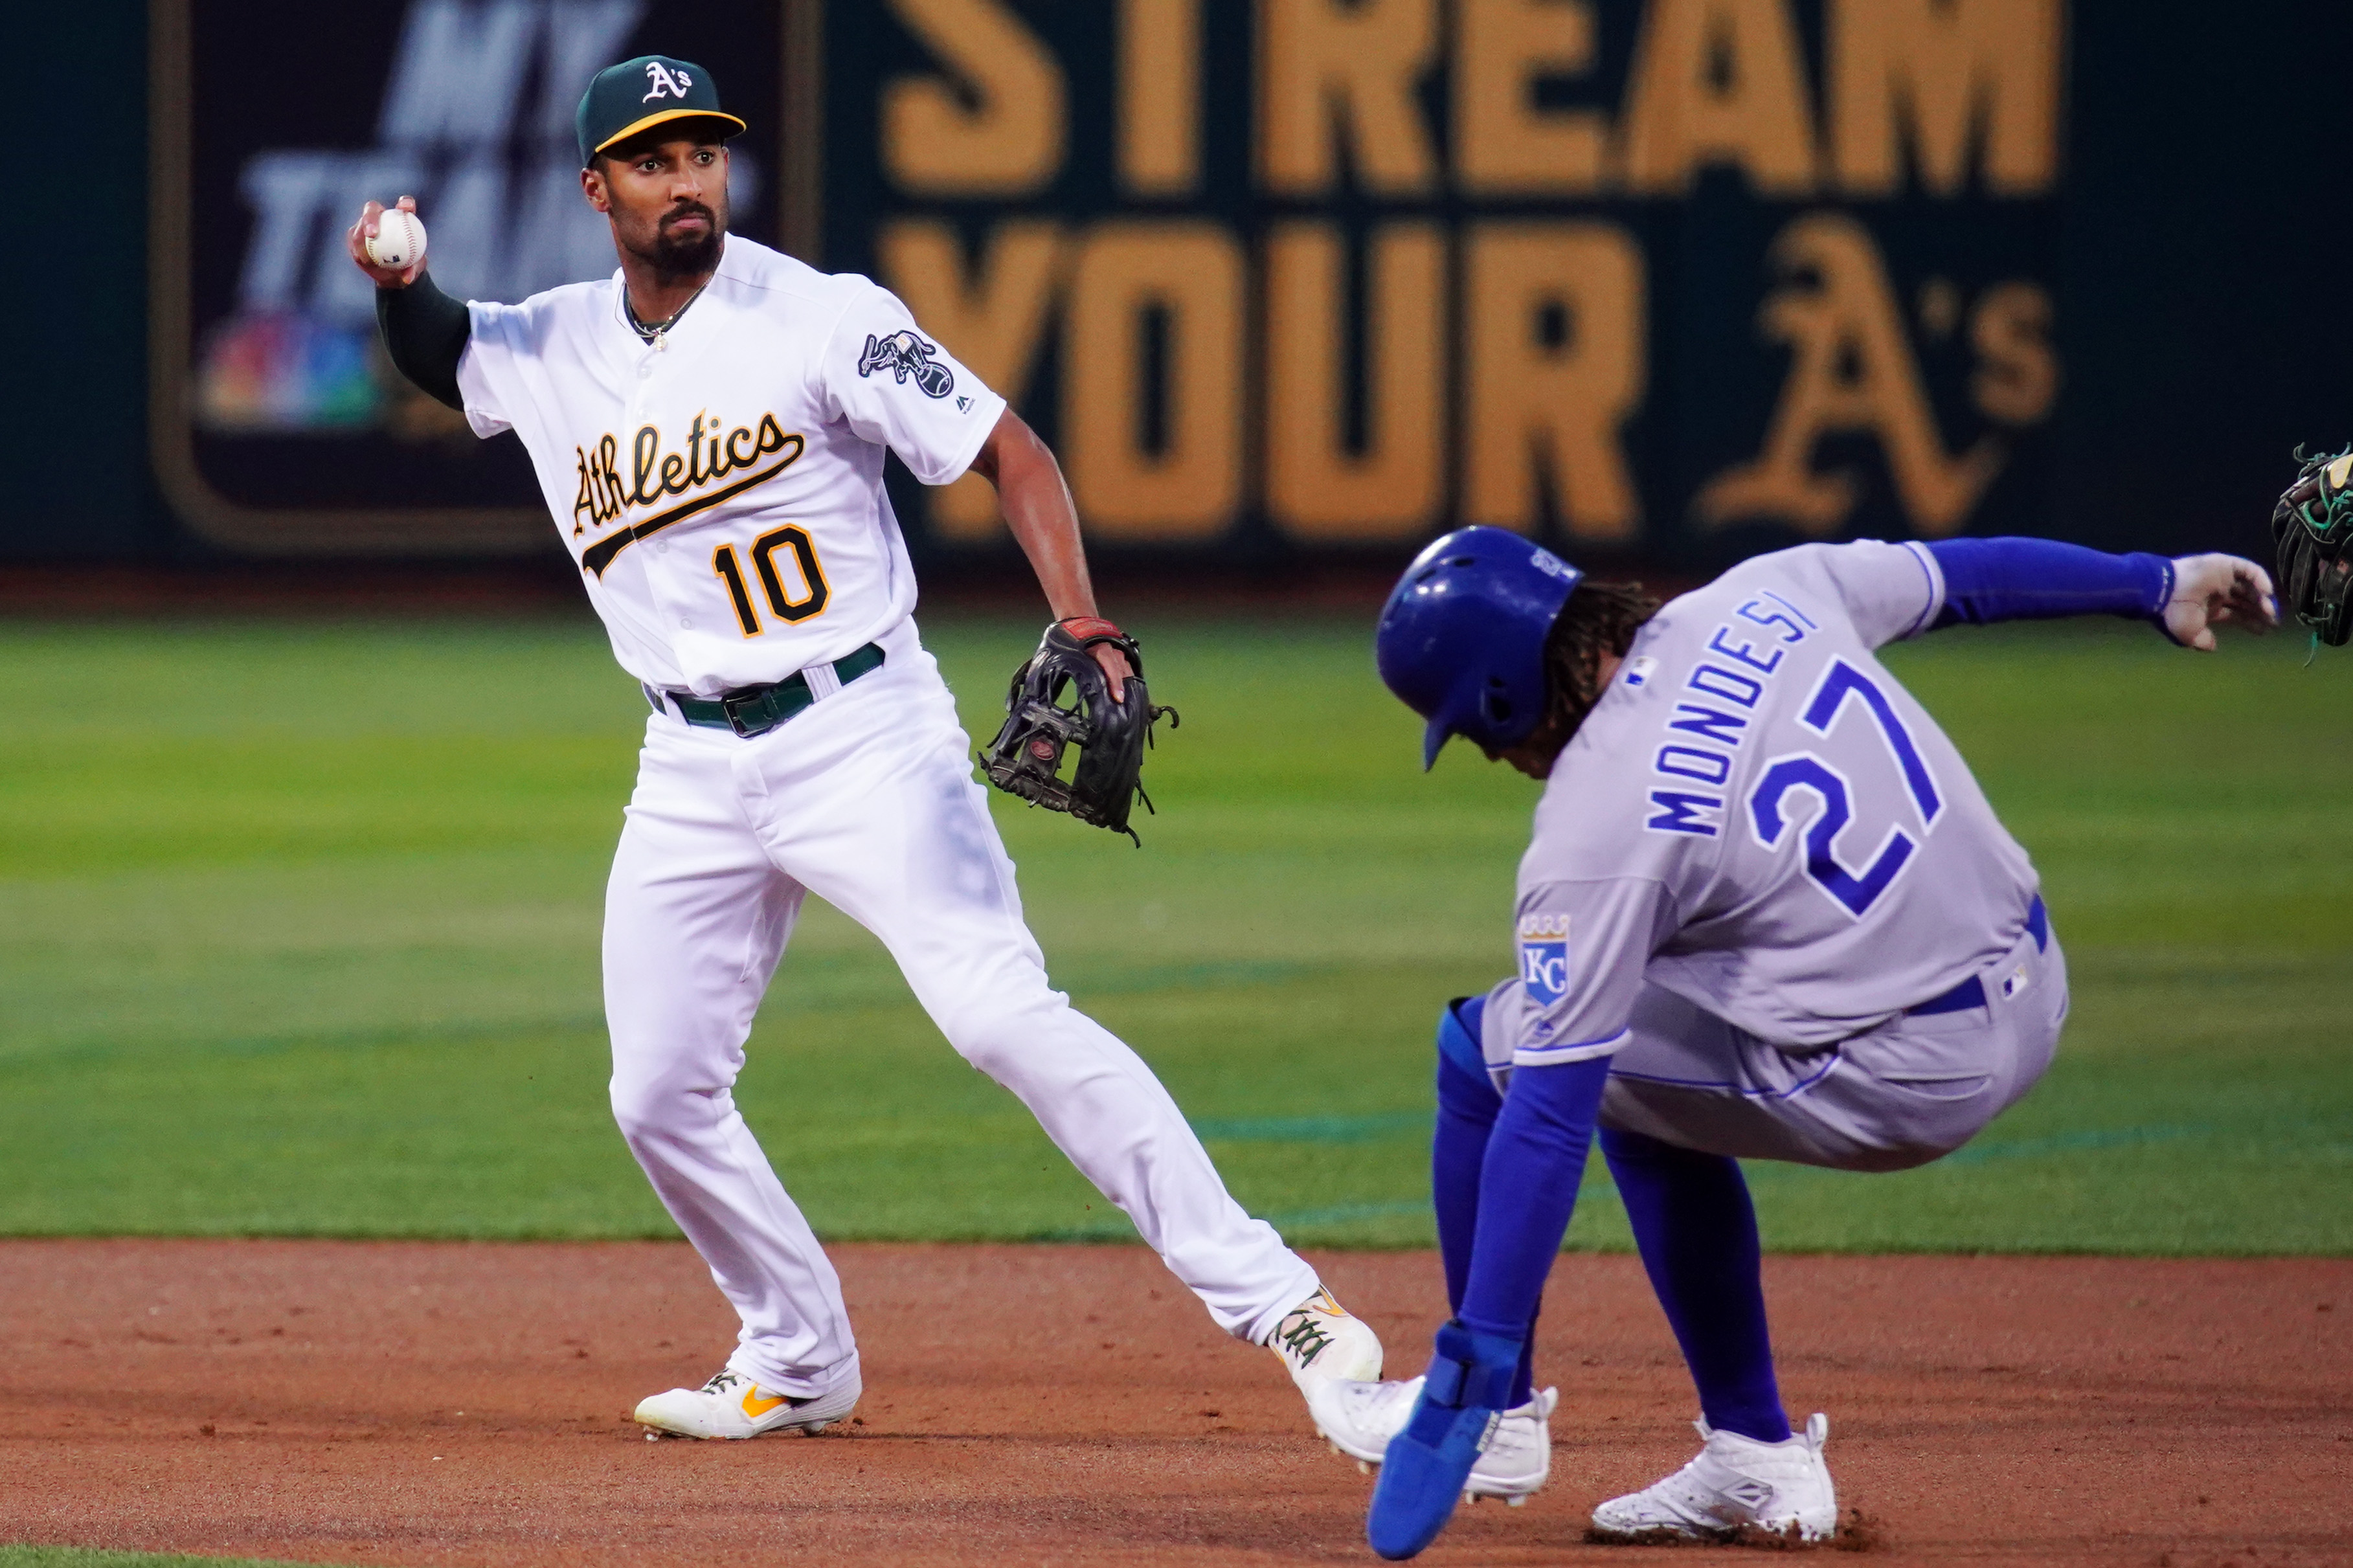 Marcus Semien #10 of the Oakland Athletics turns a double play over Adalberto Mondesi #27 of the Kansas City Royals during the first inning at Ring Central Coliseum on September 17, 2019 in Oakland, California.